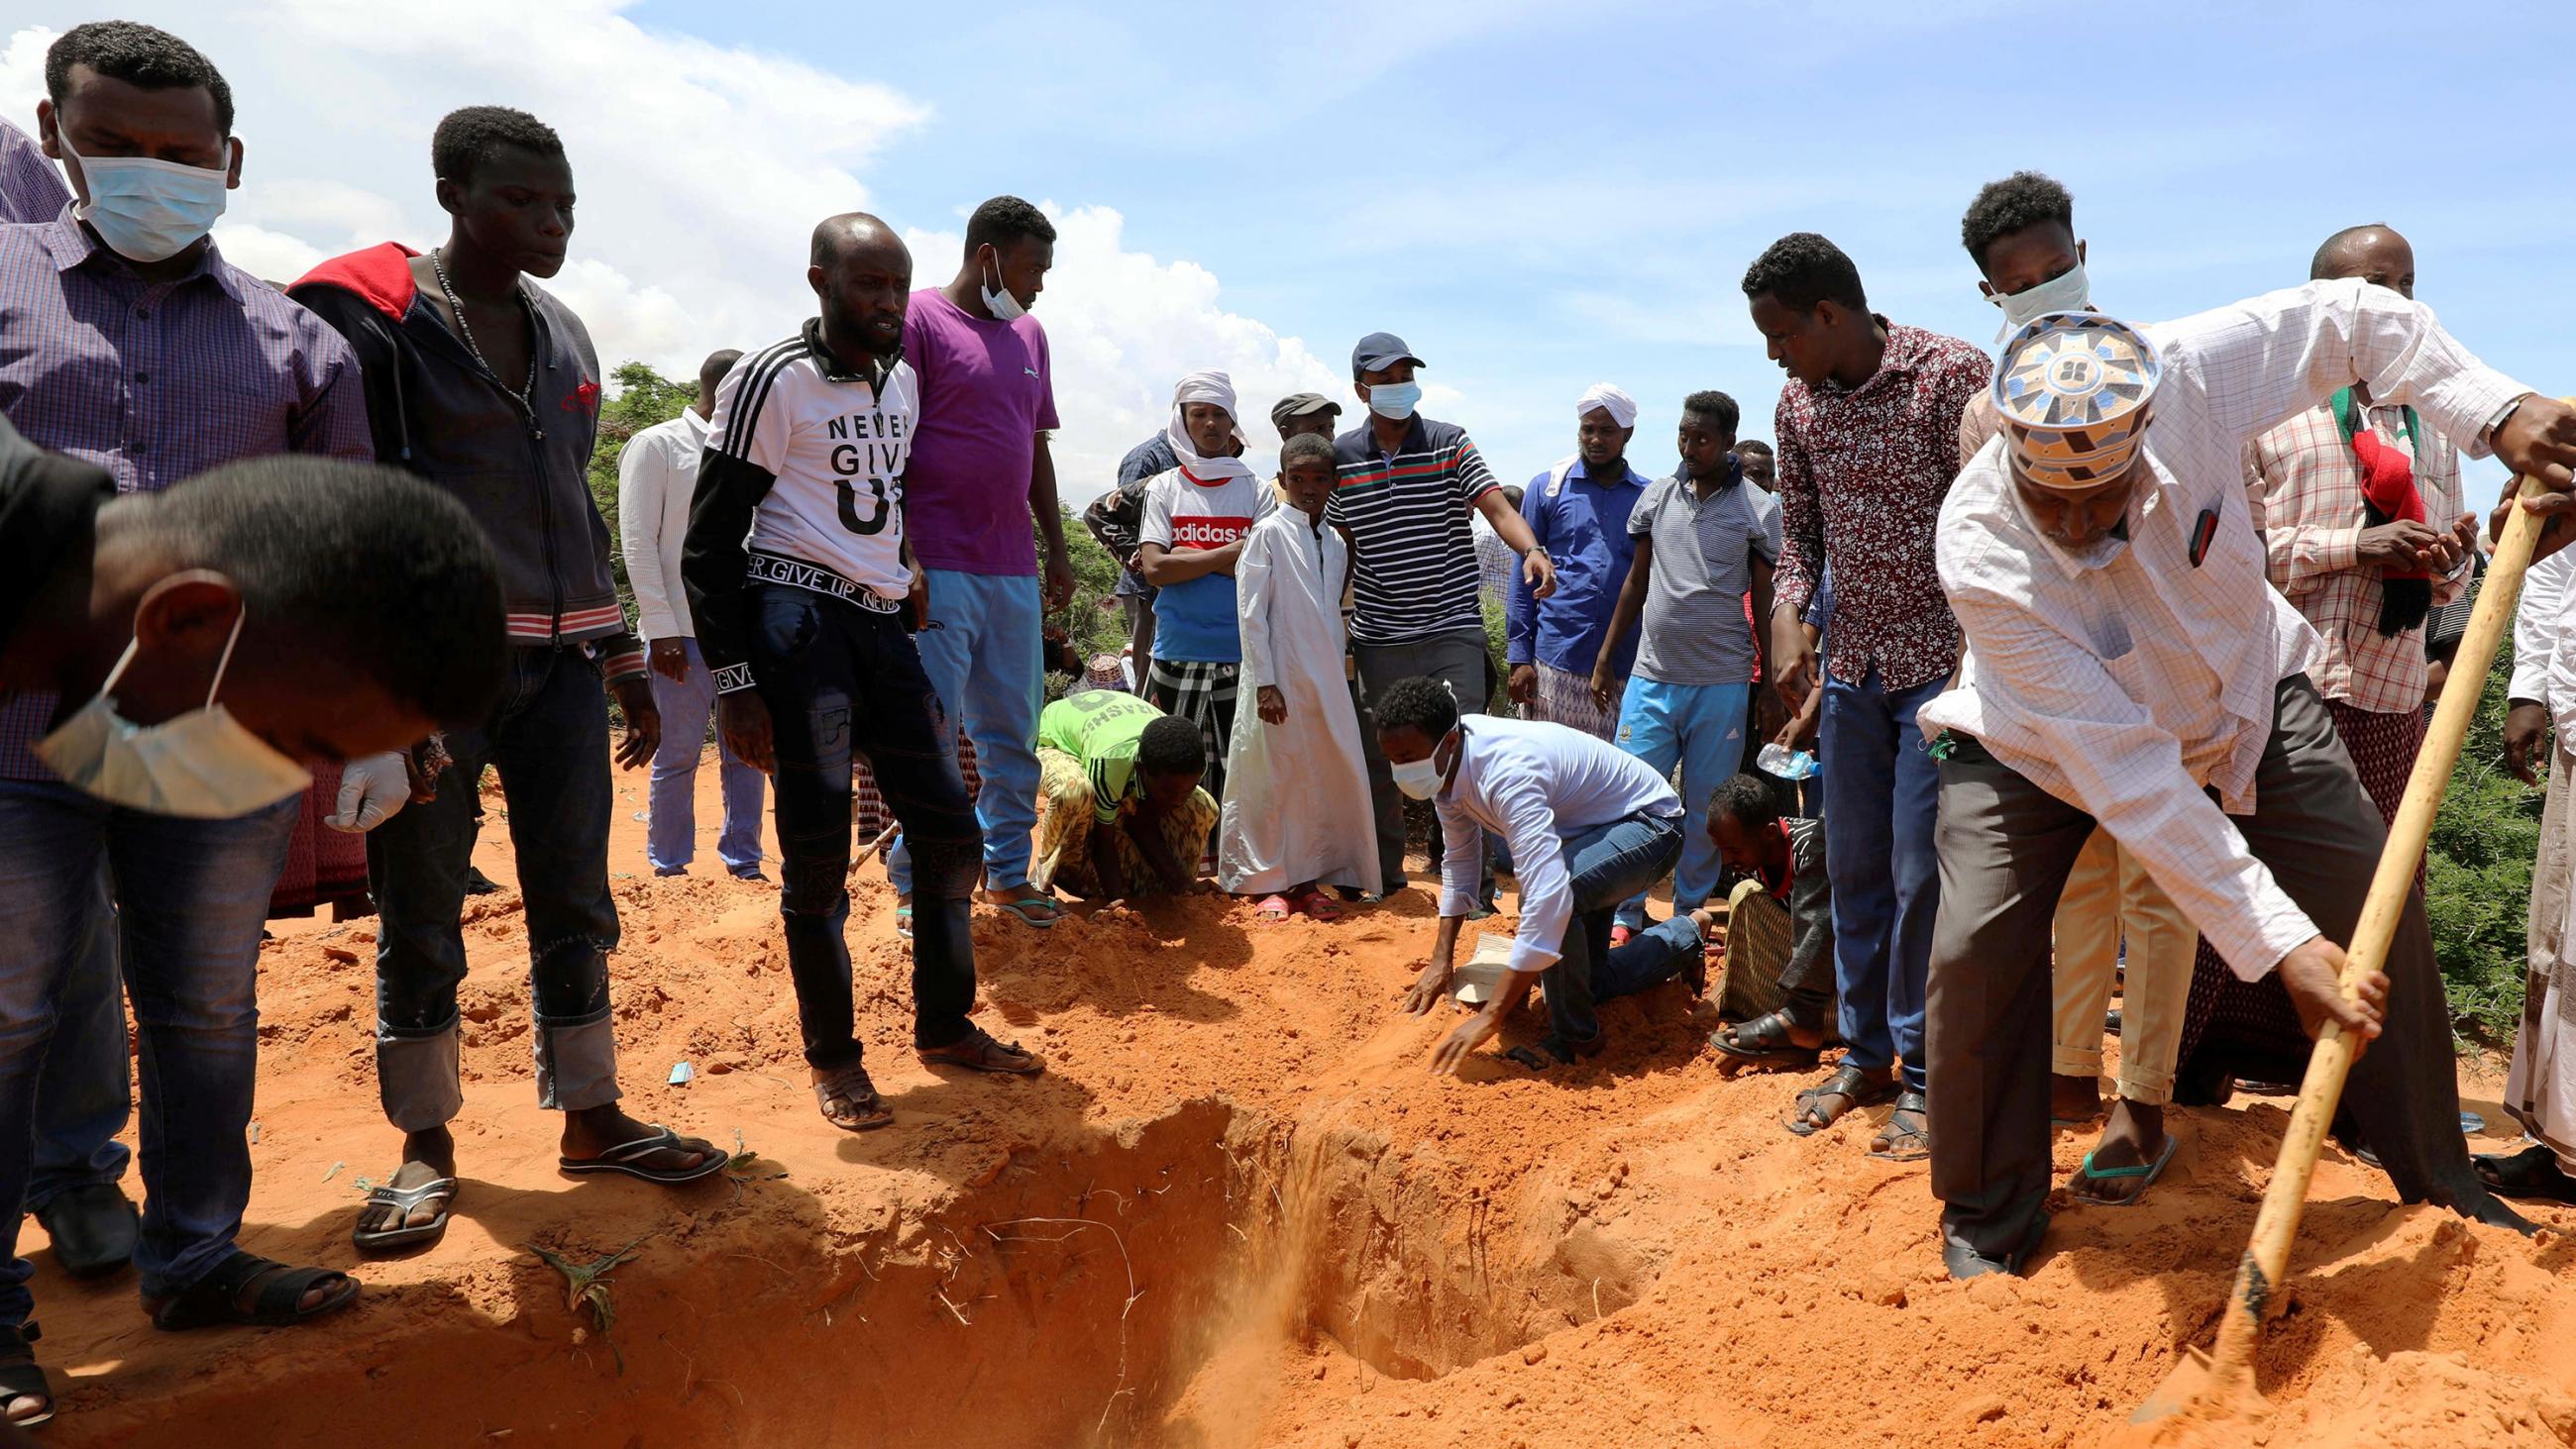 The photo shows a crowd gathered around a grave while one person shovels dirt in the hole. 